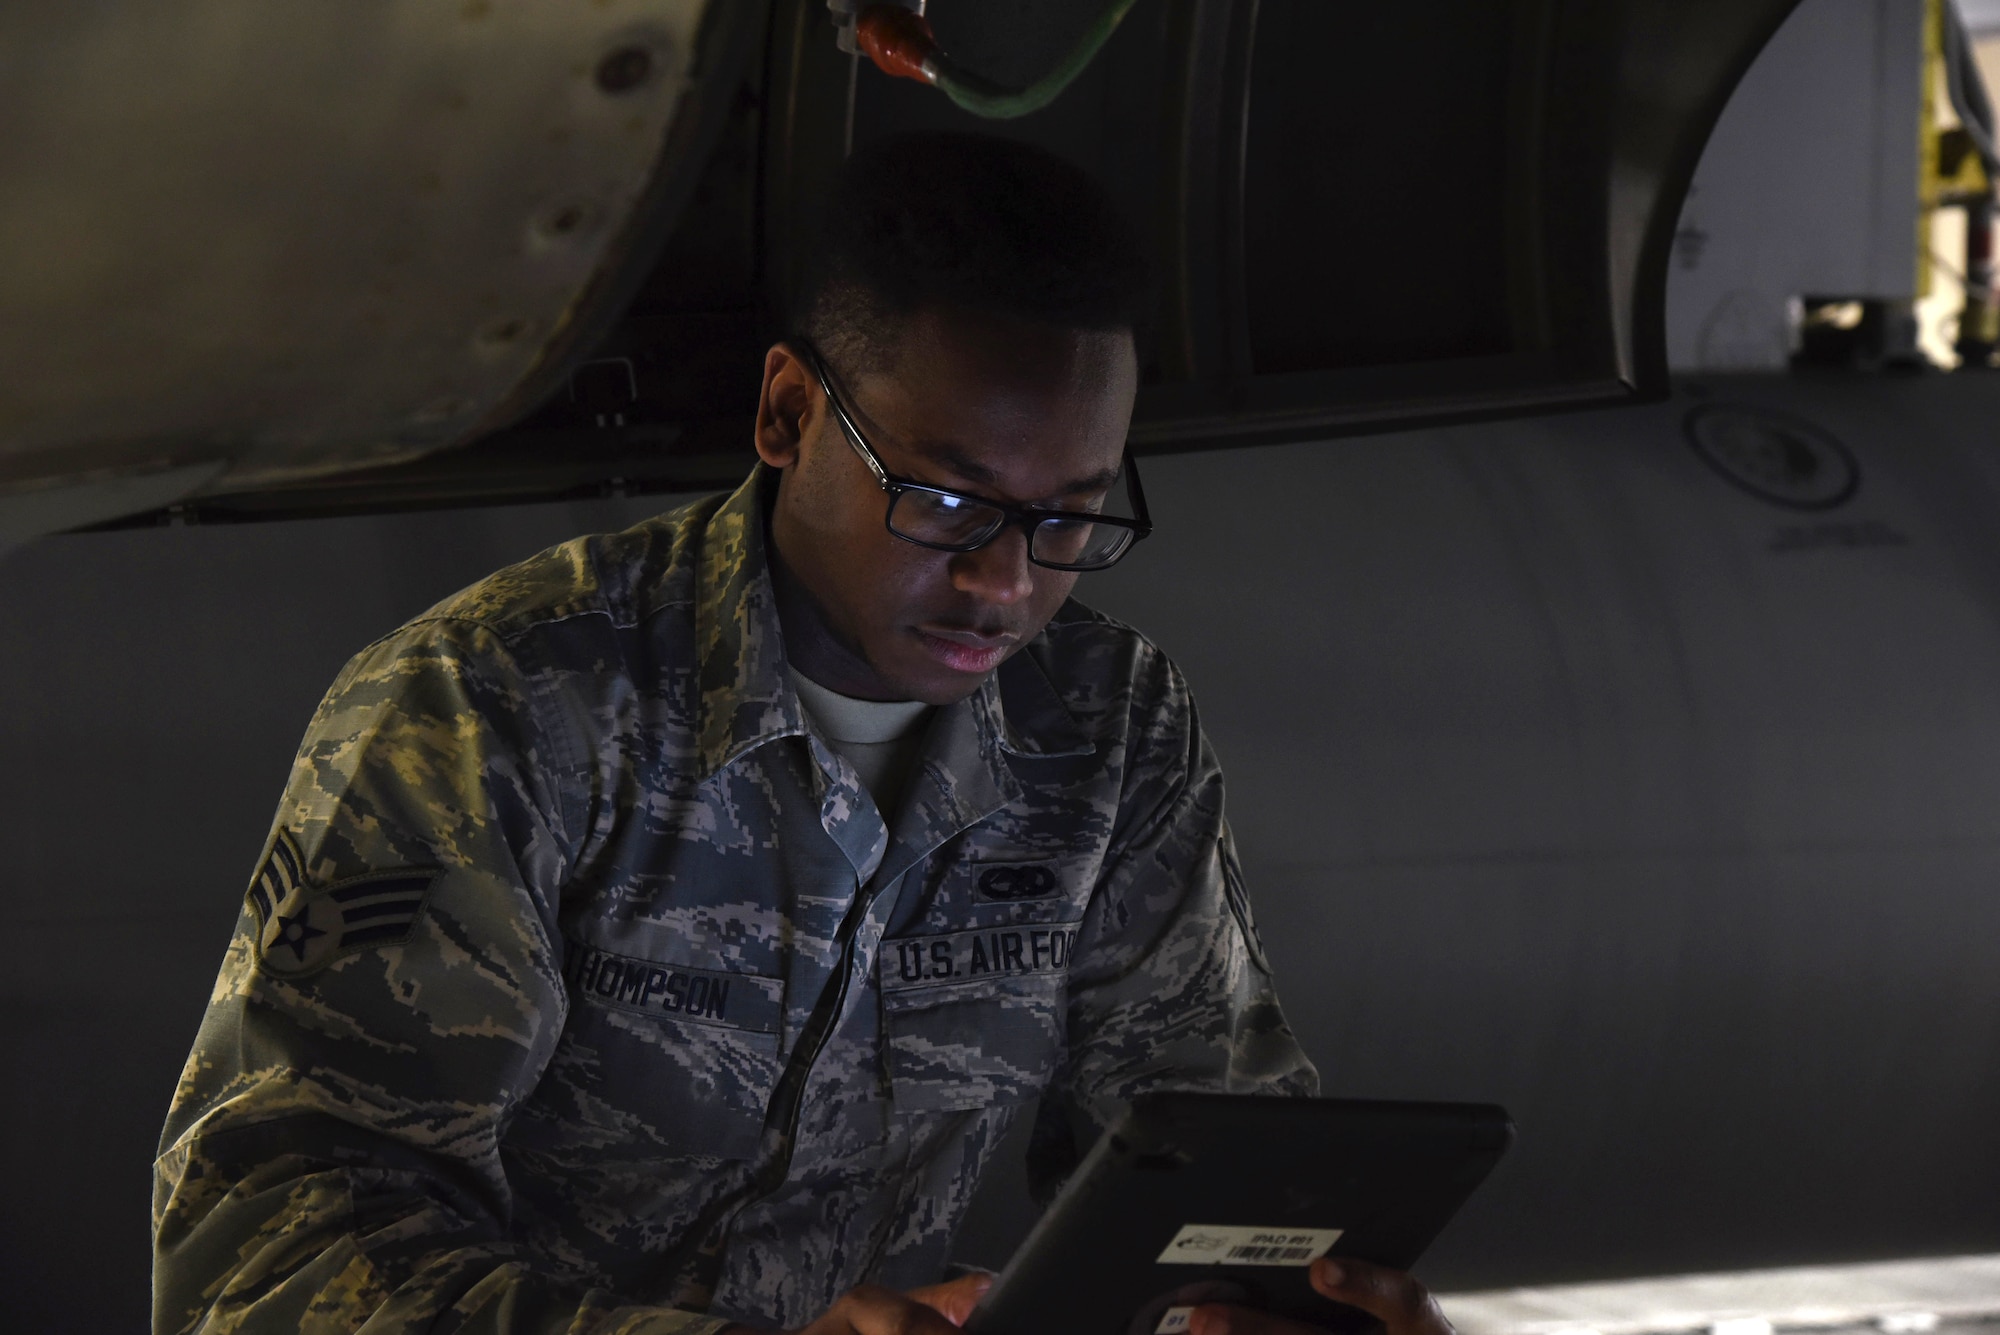 Senior Airman Josh Thompson, 403rd Maintenance Squadron aerospace propulsion mechanic, checks for the next step during the process of removing turbine vibration sensors from an engine on a WC-130J January 13, 2019. The 403rd MXS is responsible for major inspections that take place on their isochronal maintenance docks. (U.S. Air Force photo by Senior Airman Kristen Pittman)